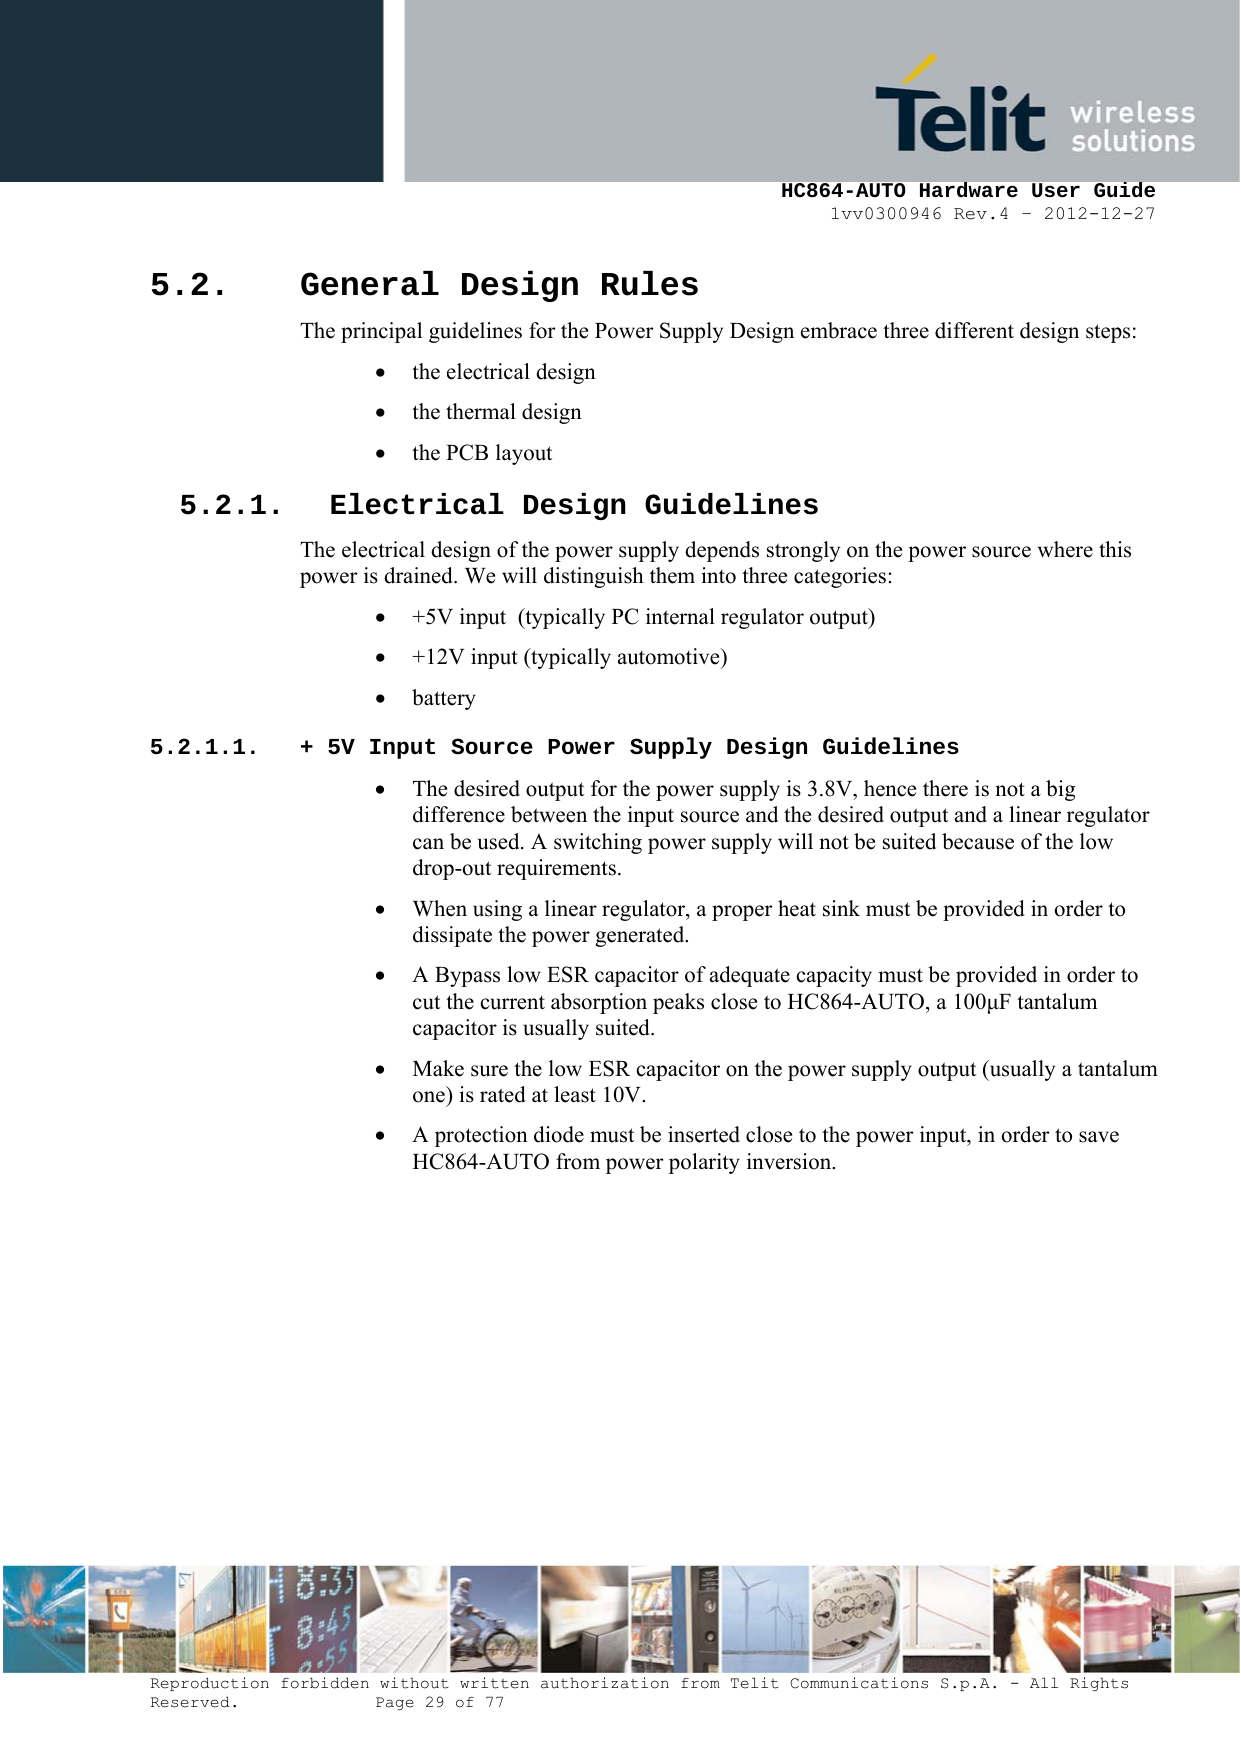     HC864-AUTO Hardware User Guide 1vv0300946 Rev.4 – 2012-12-27 Reproduction forbidden without written authorization from Telit Communications S.p.A. - All Rights Reserved.    Page 29 of 77  5.2. General Design Rules The principal guidelines for the Power Supply Design embrace three different design steps: • the electrical design • the thermal design • the PCB layout 5.2.1. Electrical Design Guidelines The electrical design of the power supply depends strongly on the power source where this power is drained. We will distinguish them into three categories: • +5V input  (typically PC internal regulator output) • +12V input (typically automotive) • battery 5.2.1.1. + 5V Input Source Power Supply Design Guidelines • The desired output for the power supply is 3.8V, hence there is not a big difference between the input source and the desired output and a linear regulator can be used. A switching power supply will not be suited because of the low drop-out requirements. • When using a linear regulator, a proper heat sink must be provided in order to dissipate the power generated. • A Bypass low ESR capacitor of adequate capacity must be provided in order to cut the current absorption peaks close to HC864-AUTO, a 100F tantalum capacitor is usually suited. • Make sure the low ESR capacitor on the power supply output (usually a tantalum one) is rated at least 10V. • A protection diode must be inserted close to the power input, in order to save HC864-AUTO from power polarity inversion.       